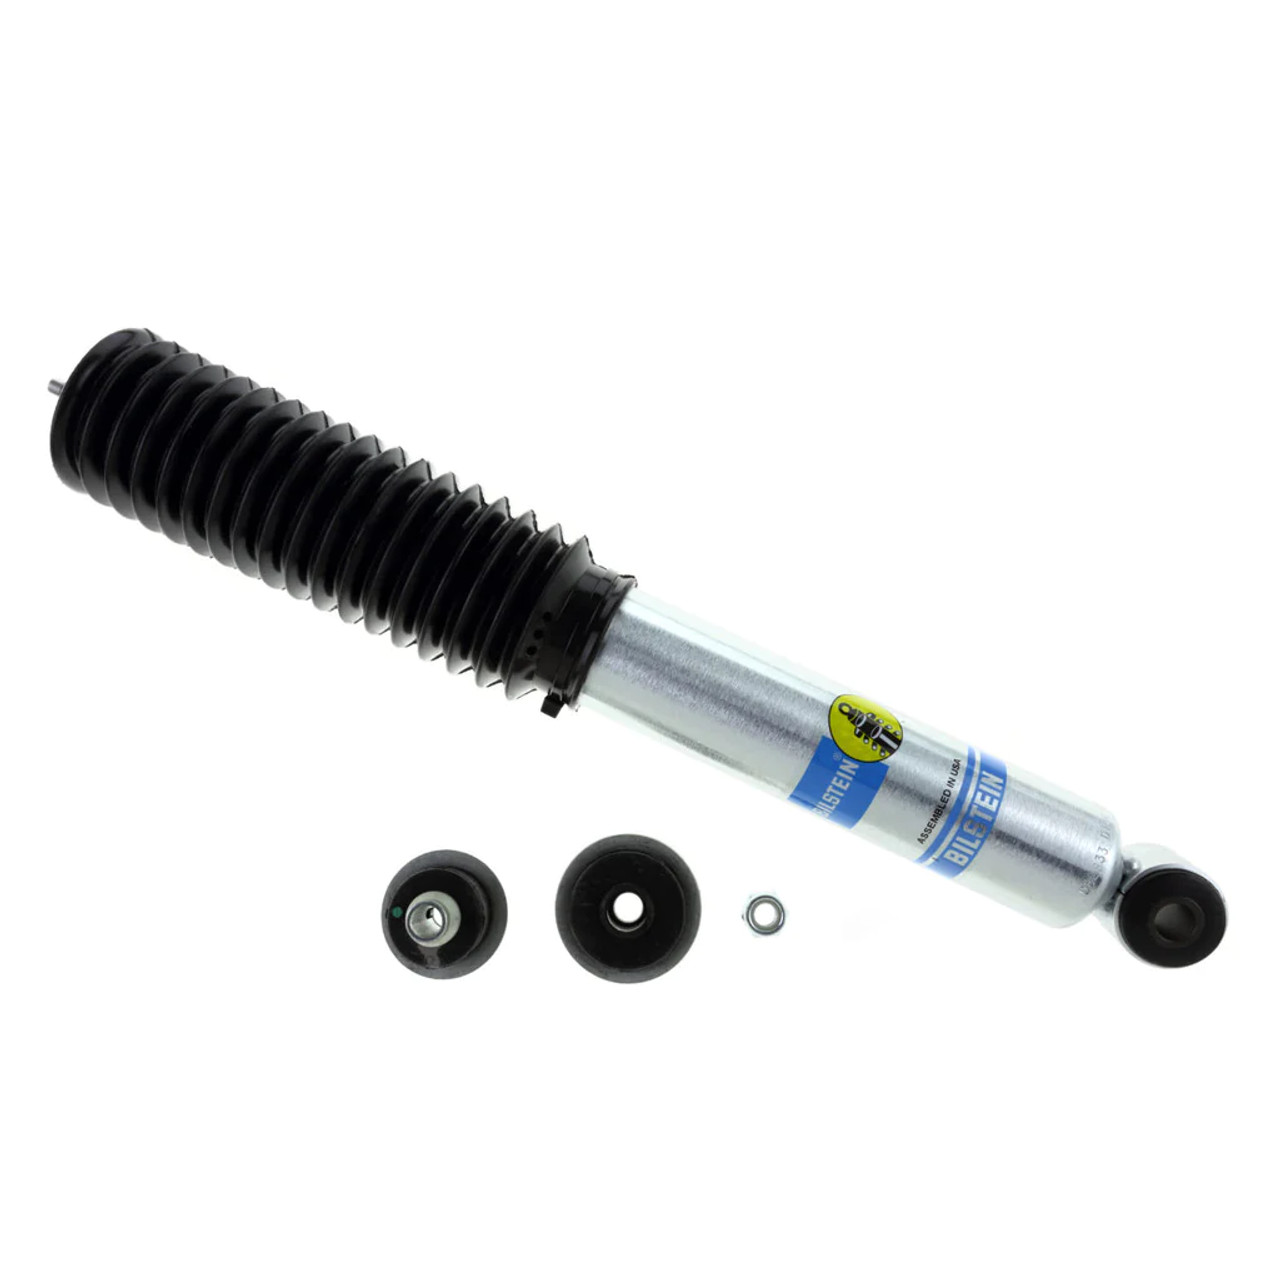 BILSTEIN B8 5100 SHOCK FRONT for 1999 to 2013 Chevy/GMC 1500 Lifted 0-2.5 Inches (BIL24-186735) Main View